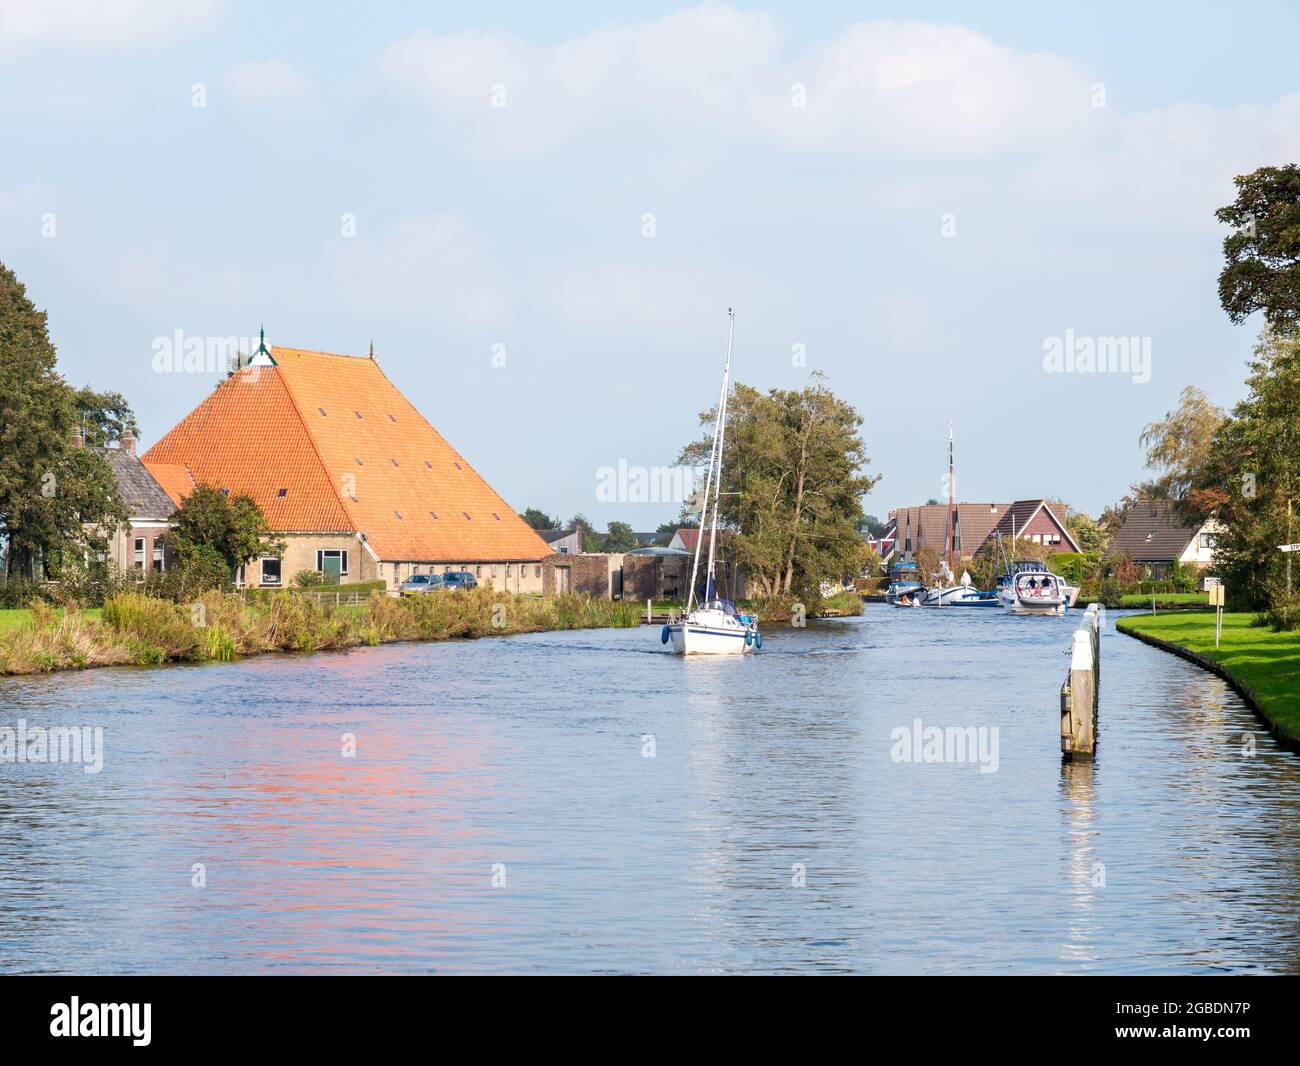 People on sailing boat cruising on river Boorne in Akkrum, Friesland, Netherlands Stock Photo